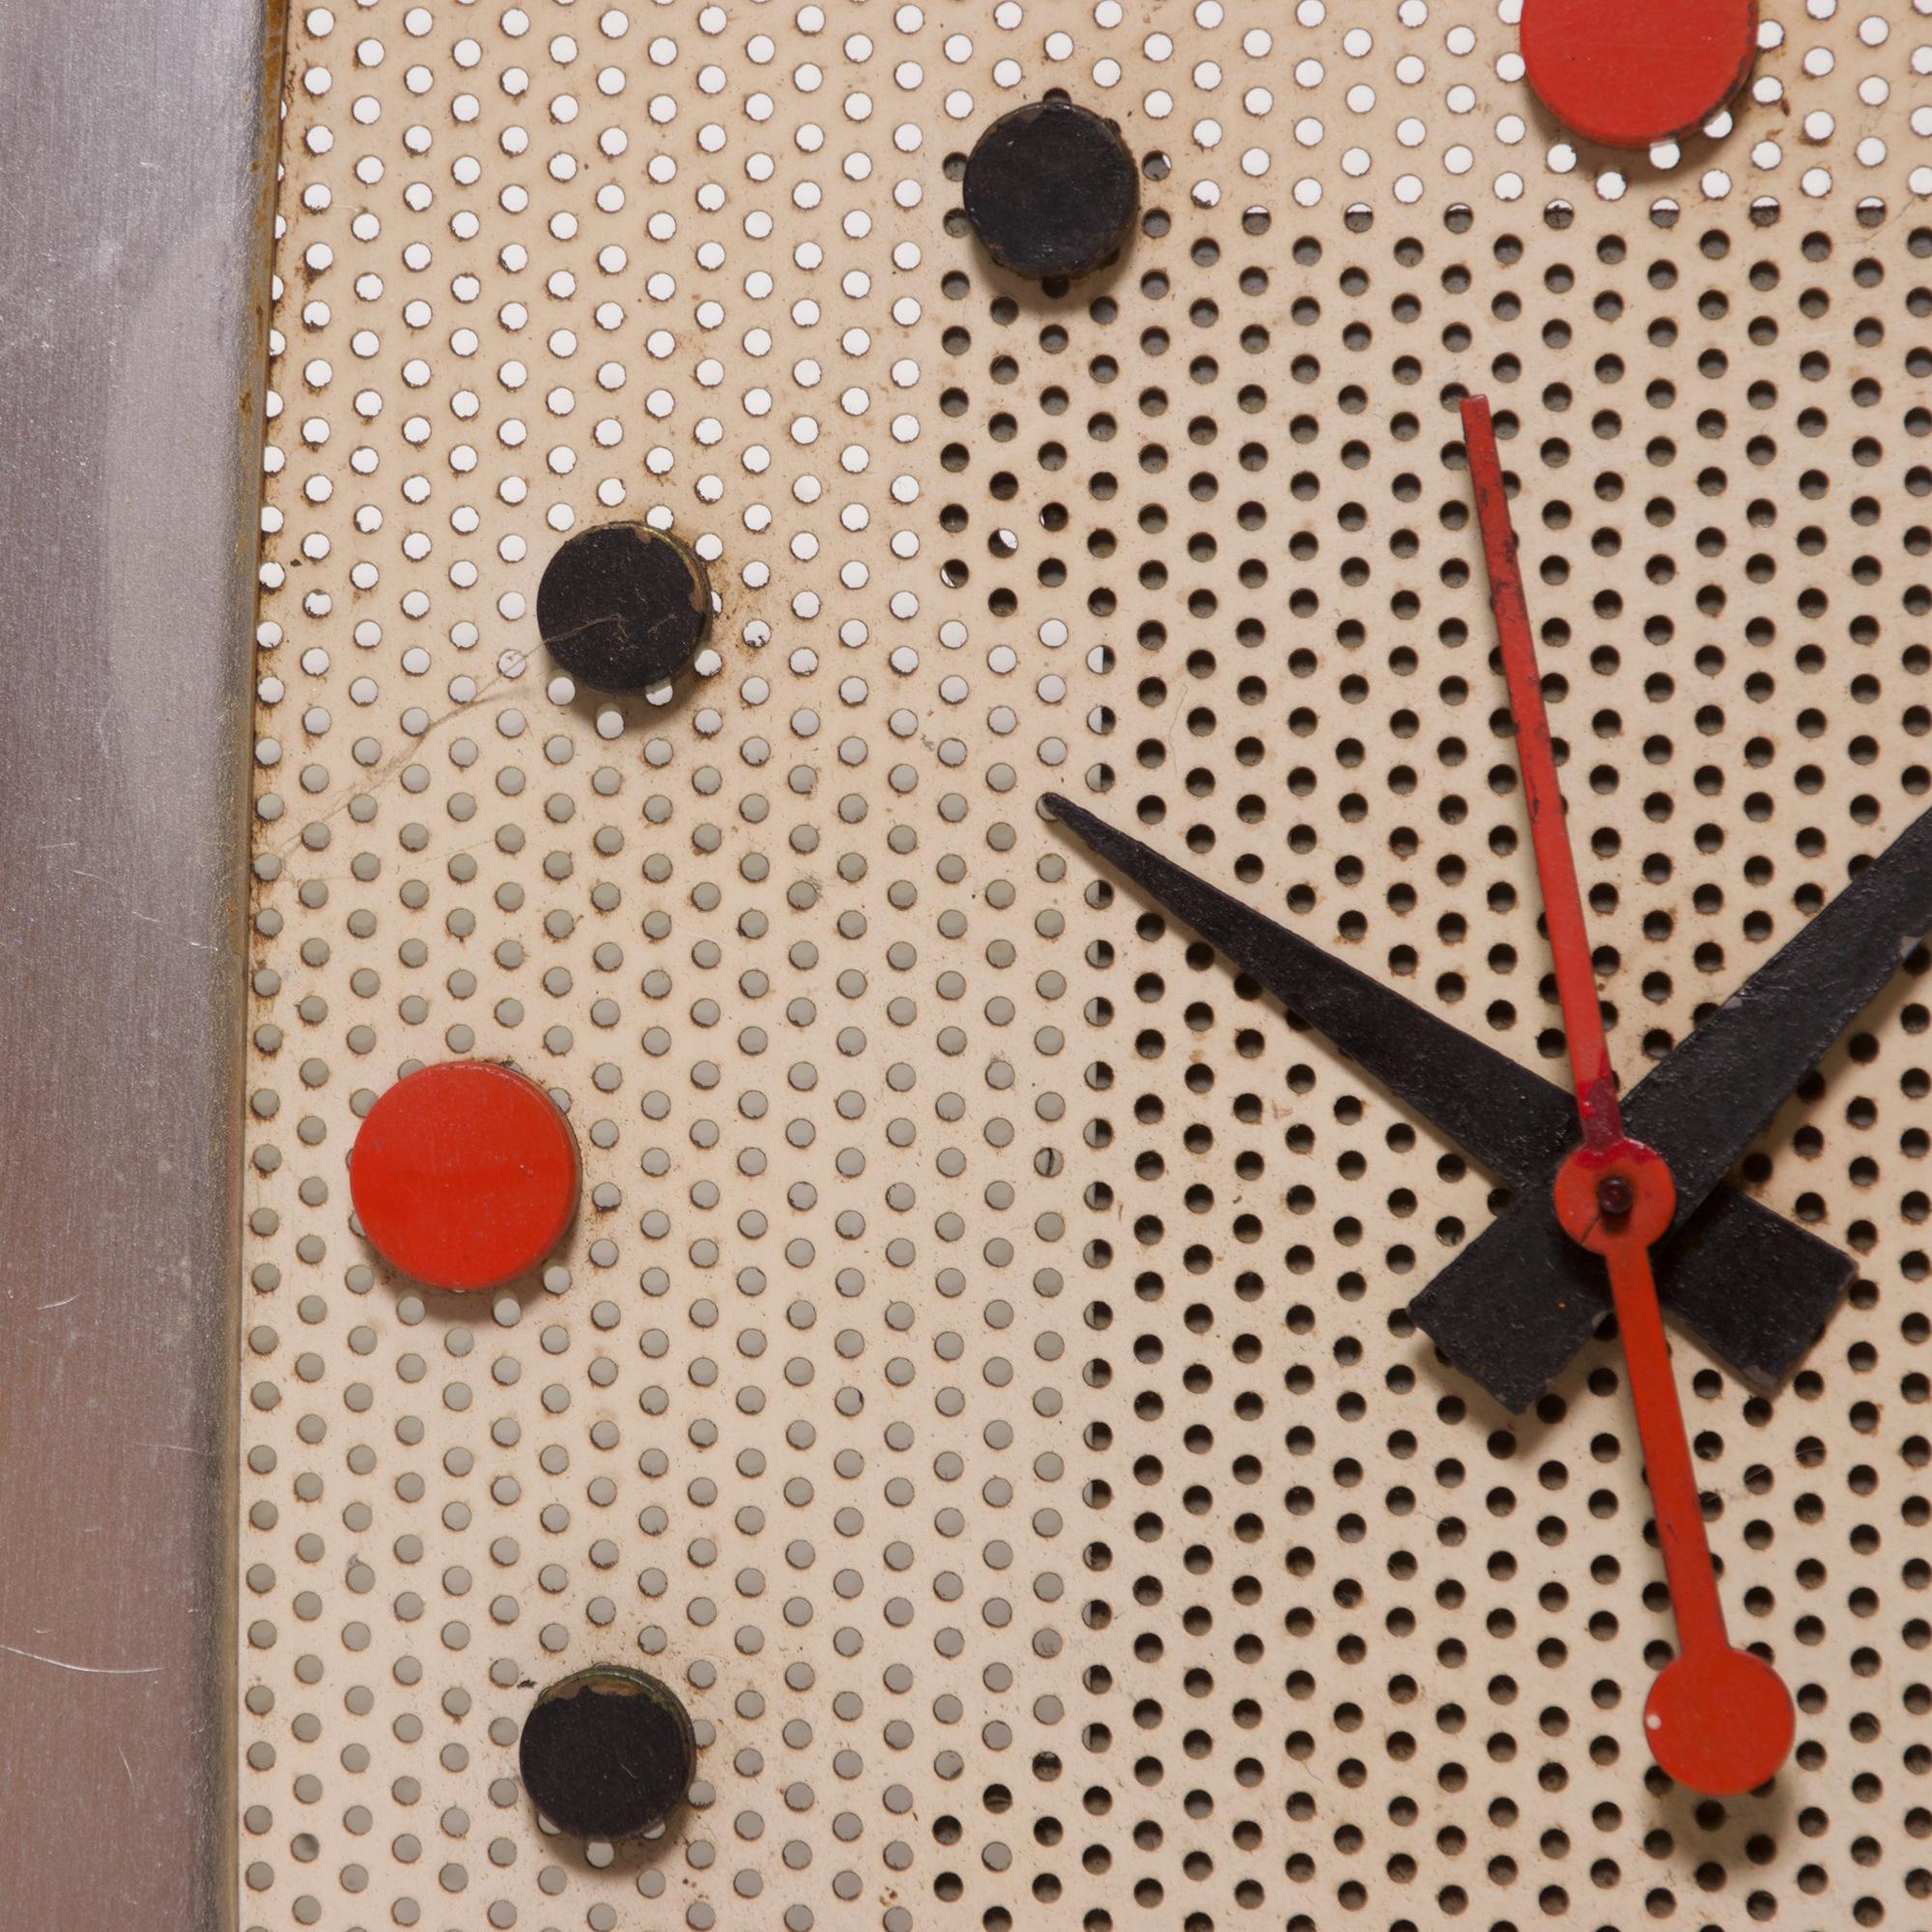 Mid-Century Modern 1957 Classic Wall Clock Nu Tone Chime L35 Perforated Metal Howard Miller Style